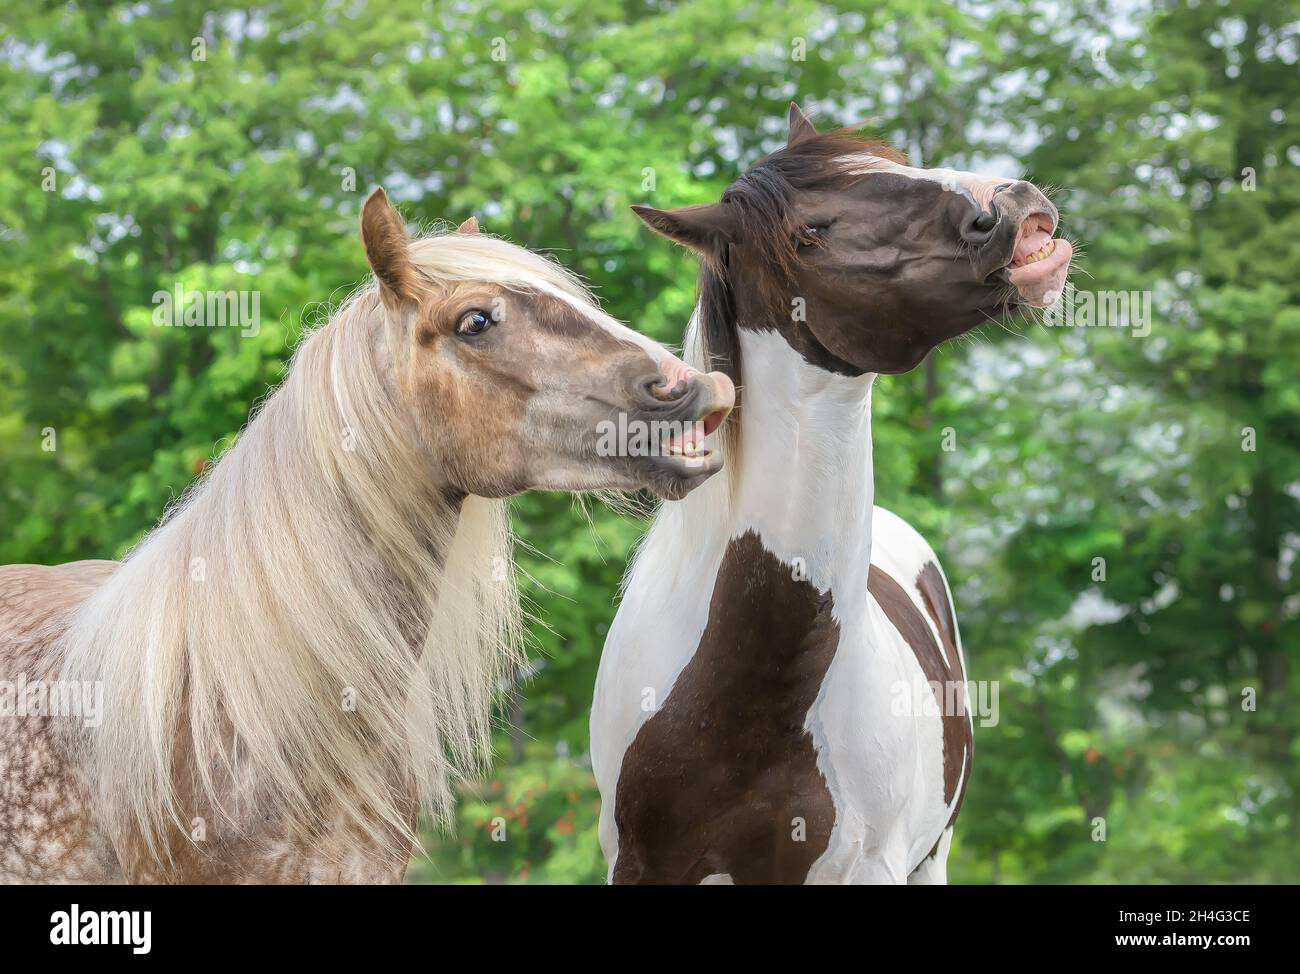 HORSES CURLING LIP UP TO MAKE HUMOROUS FACE Stock Photo